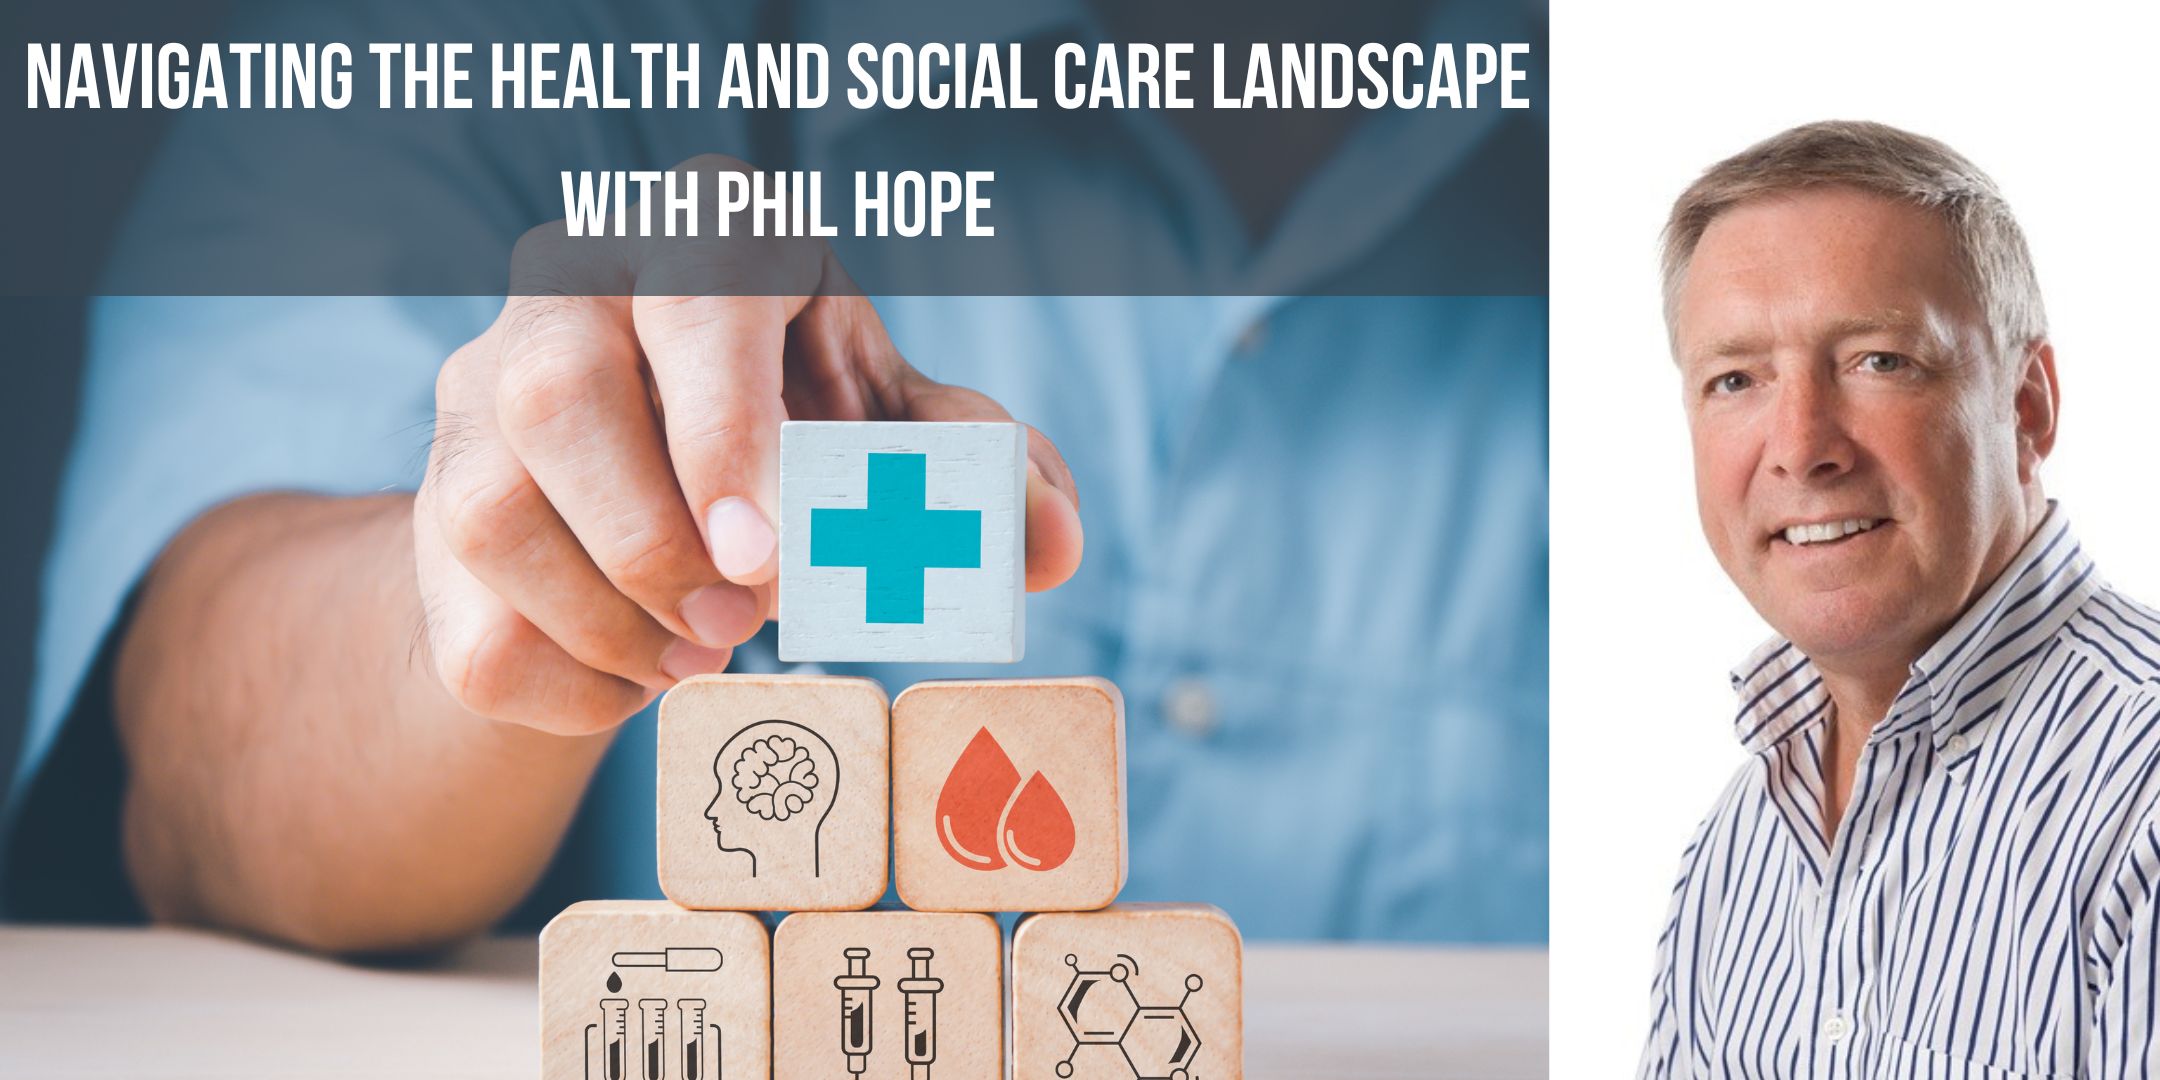 Navigating the health and social care landscape with Phil Hope